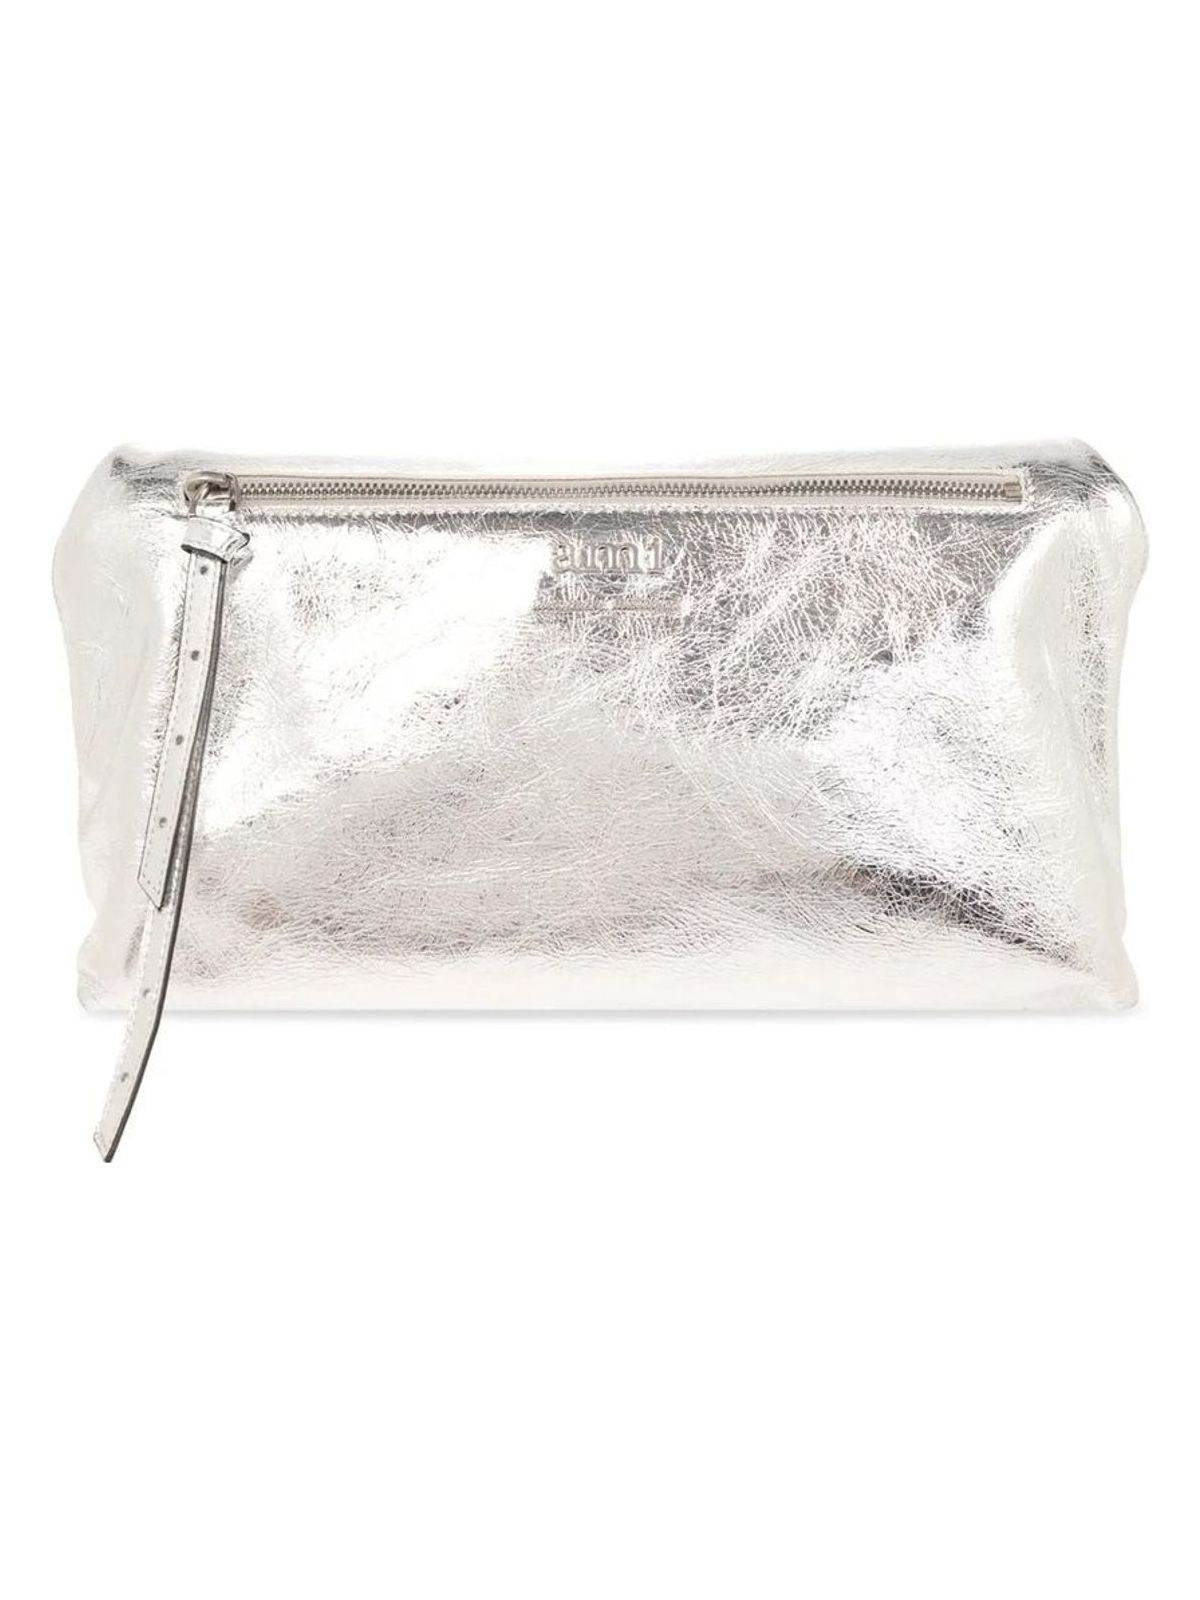 900 AMI PARIS PLATED GROCERY POUCH POCKET